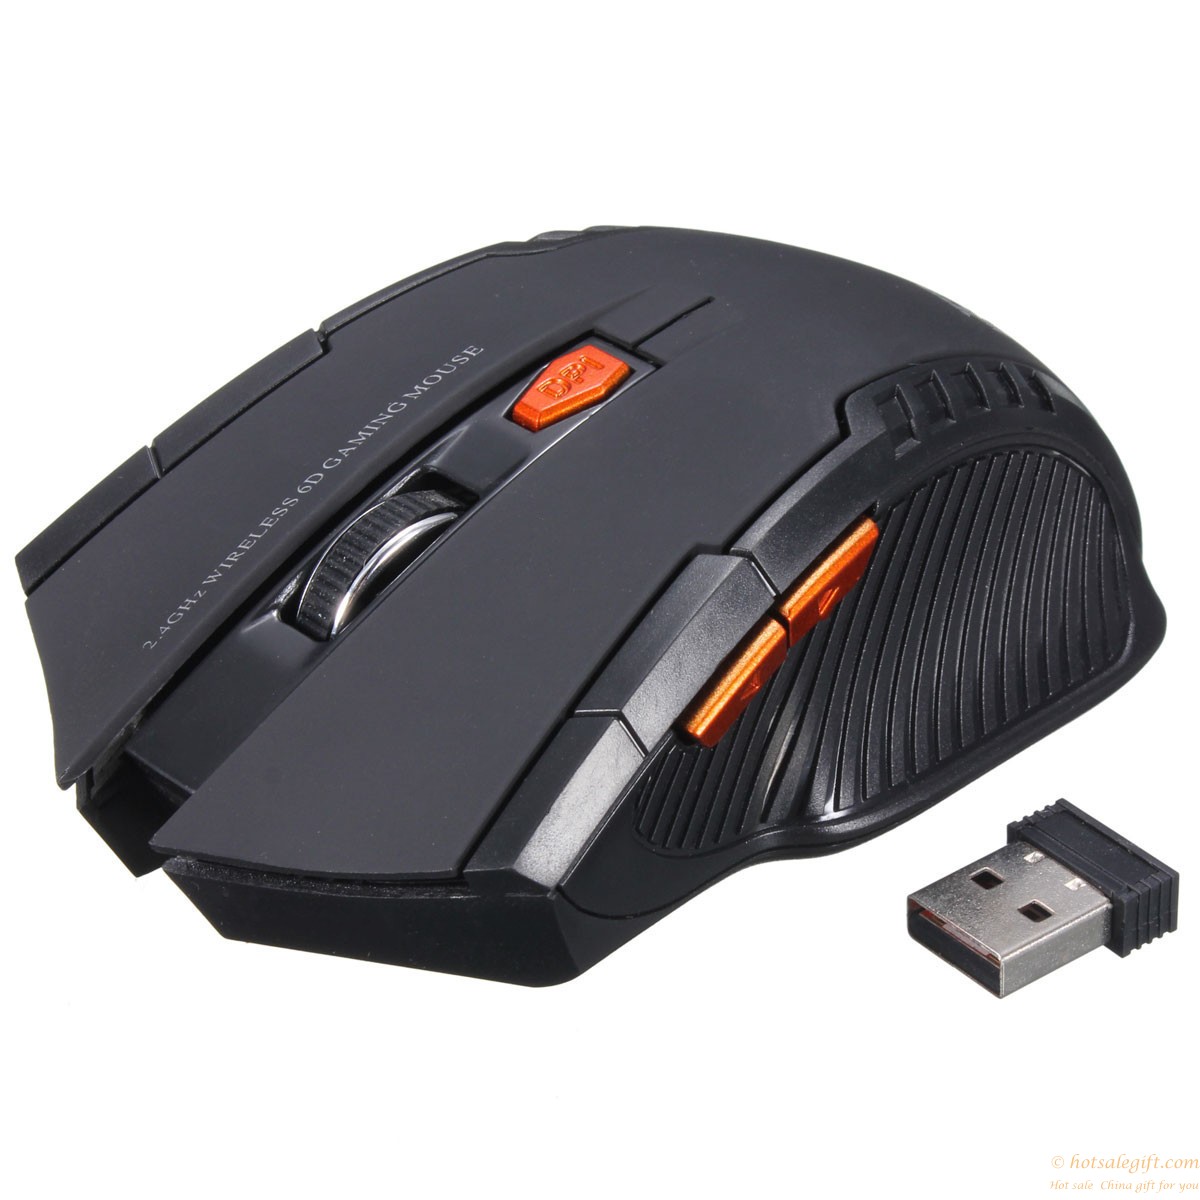 hotsalegift 24ghz high dpi wireless mouse gaming wireless mouse 3